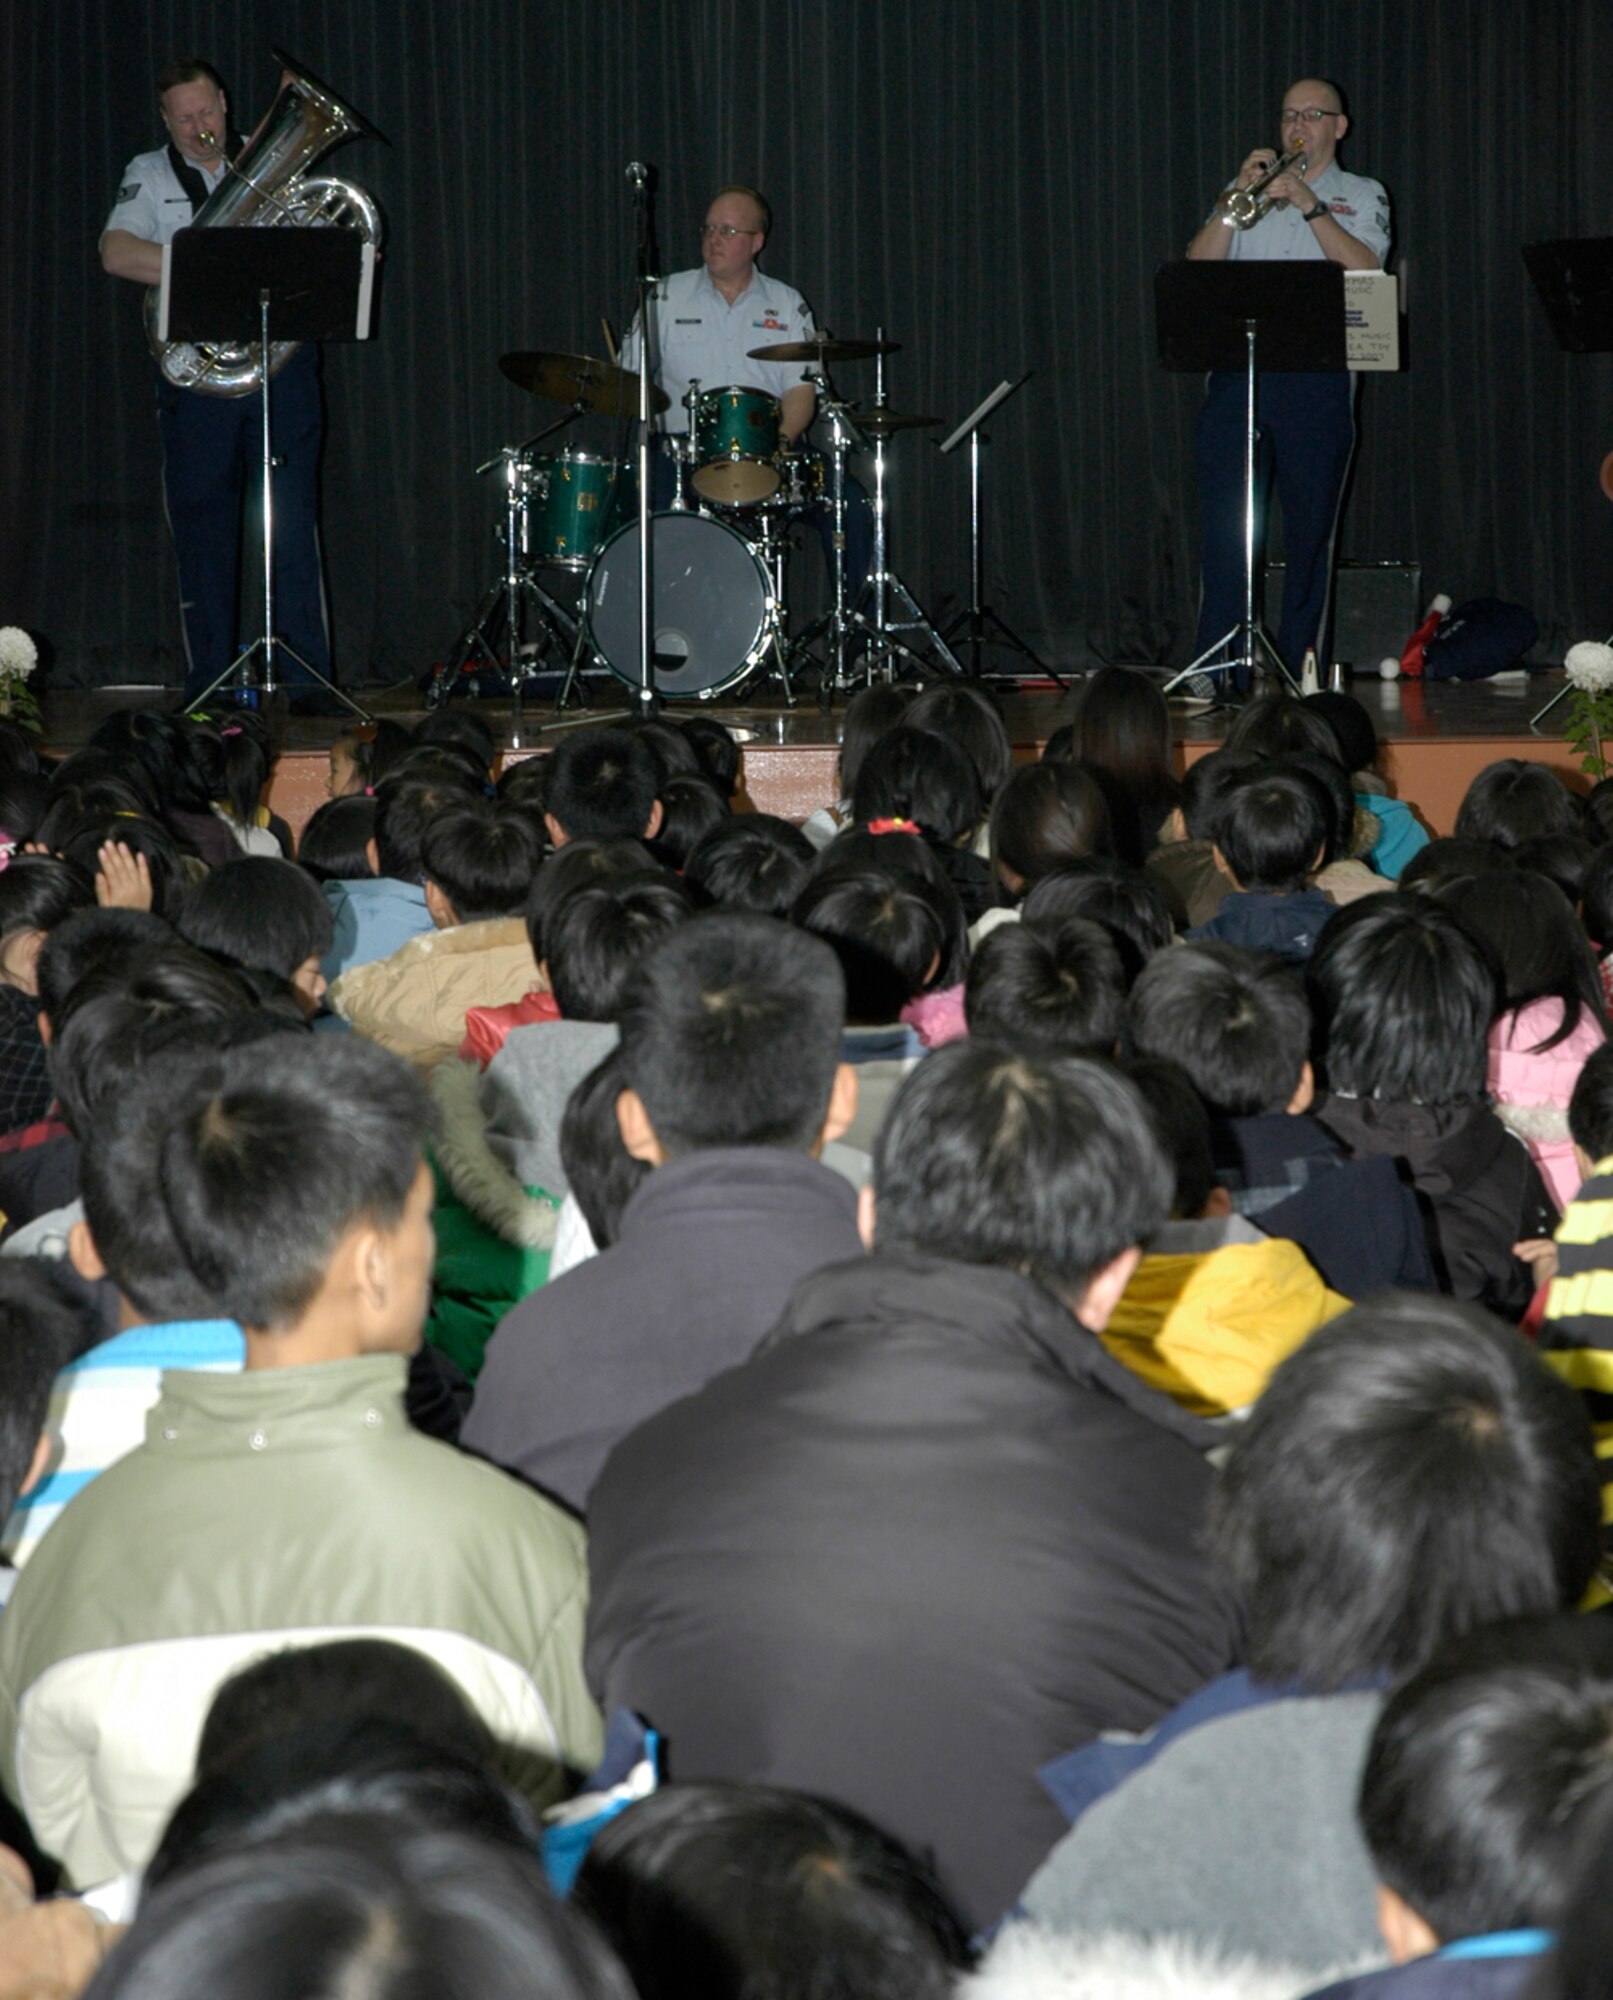 KUNSAN AIR BASE, South Korea -- Air Force Band of the Pacific performs for students at Na Po Elementary School during the groups performance at the local Gunsan City School Dec. 5. The Elmendorf Air Force Base, Alaska based band performed for more than 300 students, parents and teachers as part of their civic outreach and the base's Good Neighbor Program. (U.S. Air Force Photo/Master Sgt. Sean P. Houlihan)